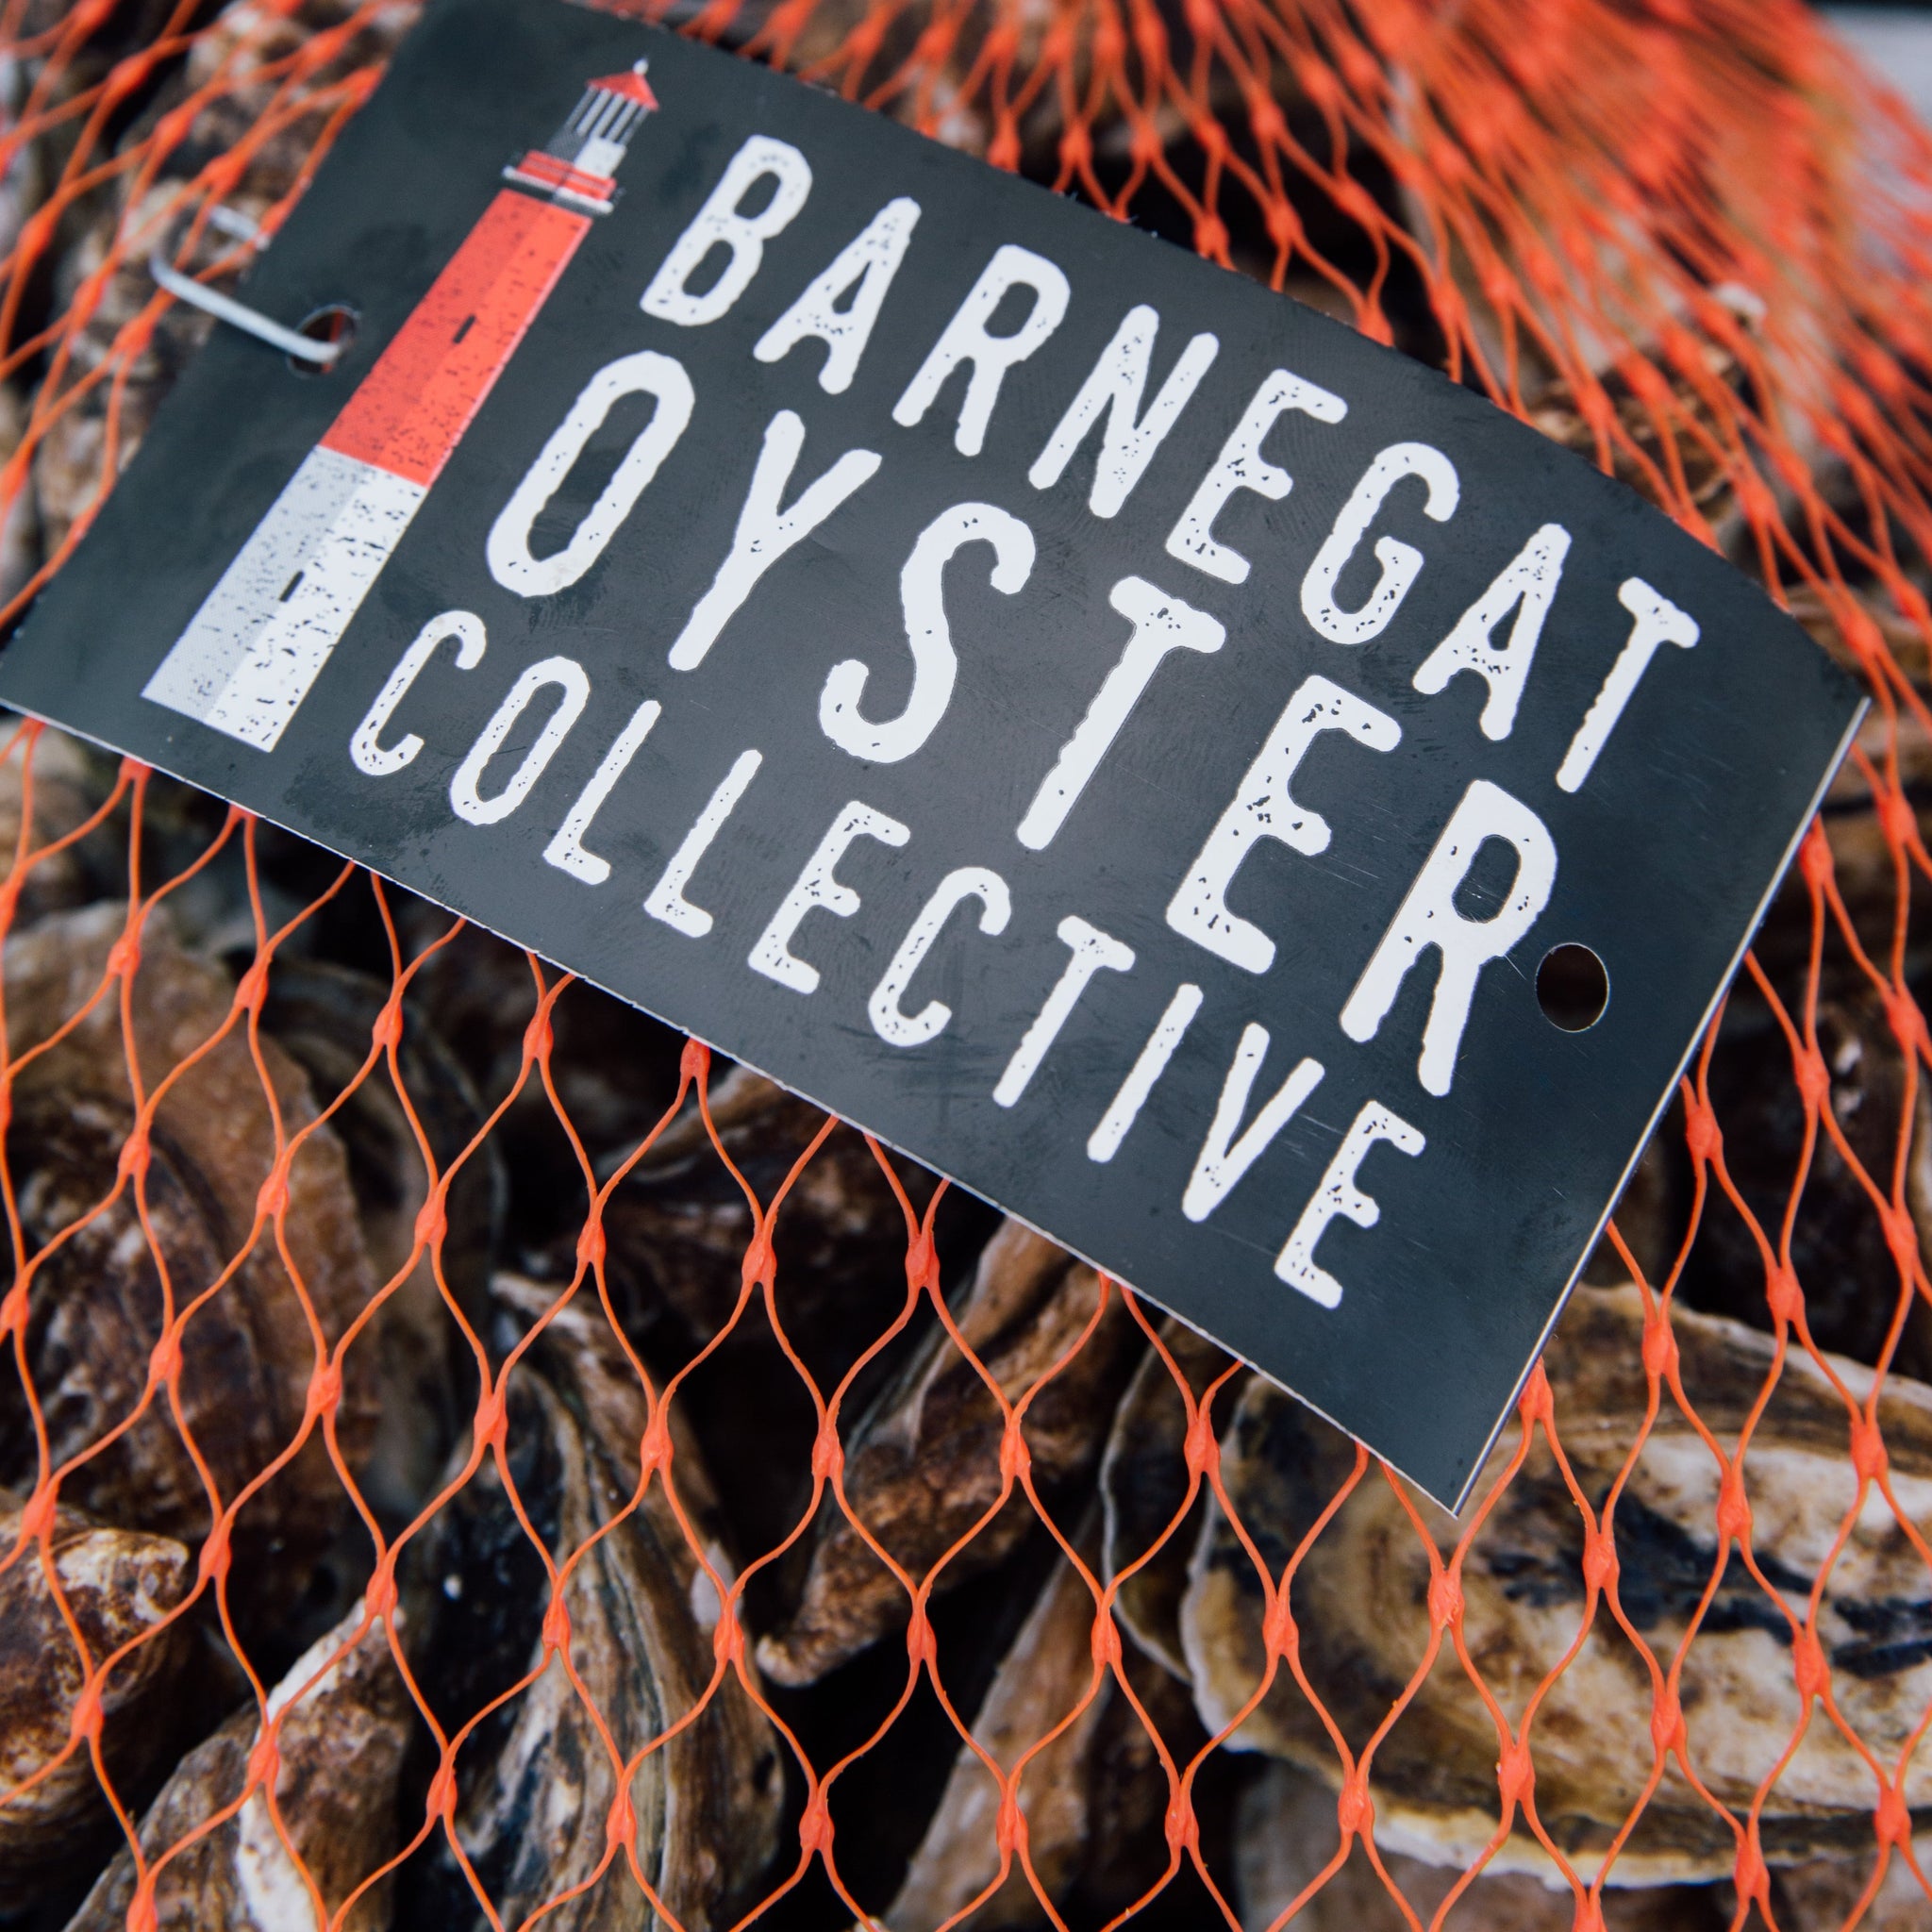 Cast Iron Oyster Roast Pan – Barnegat Oyster Collective